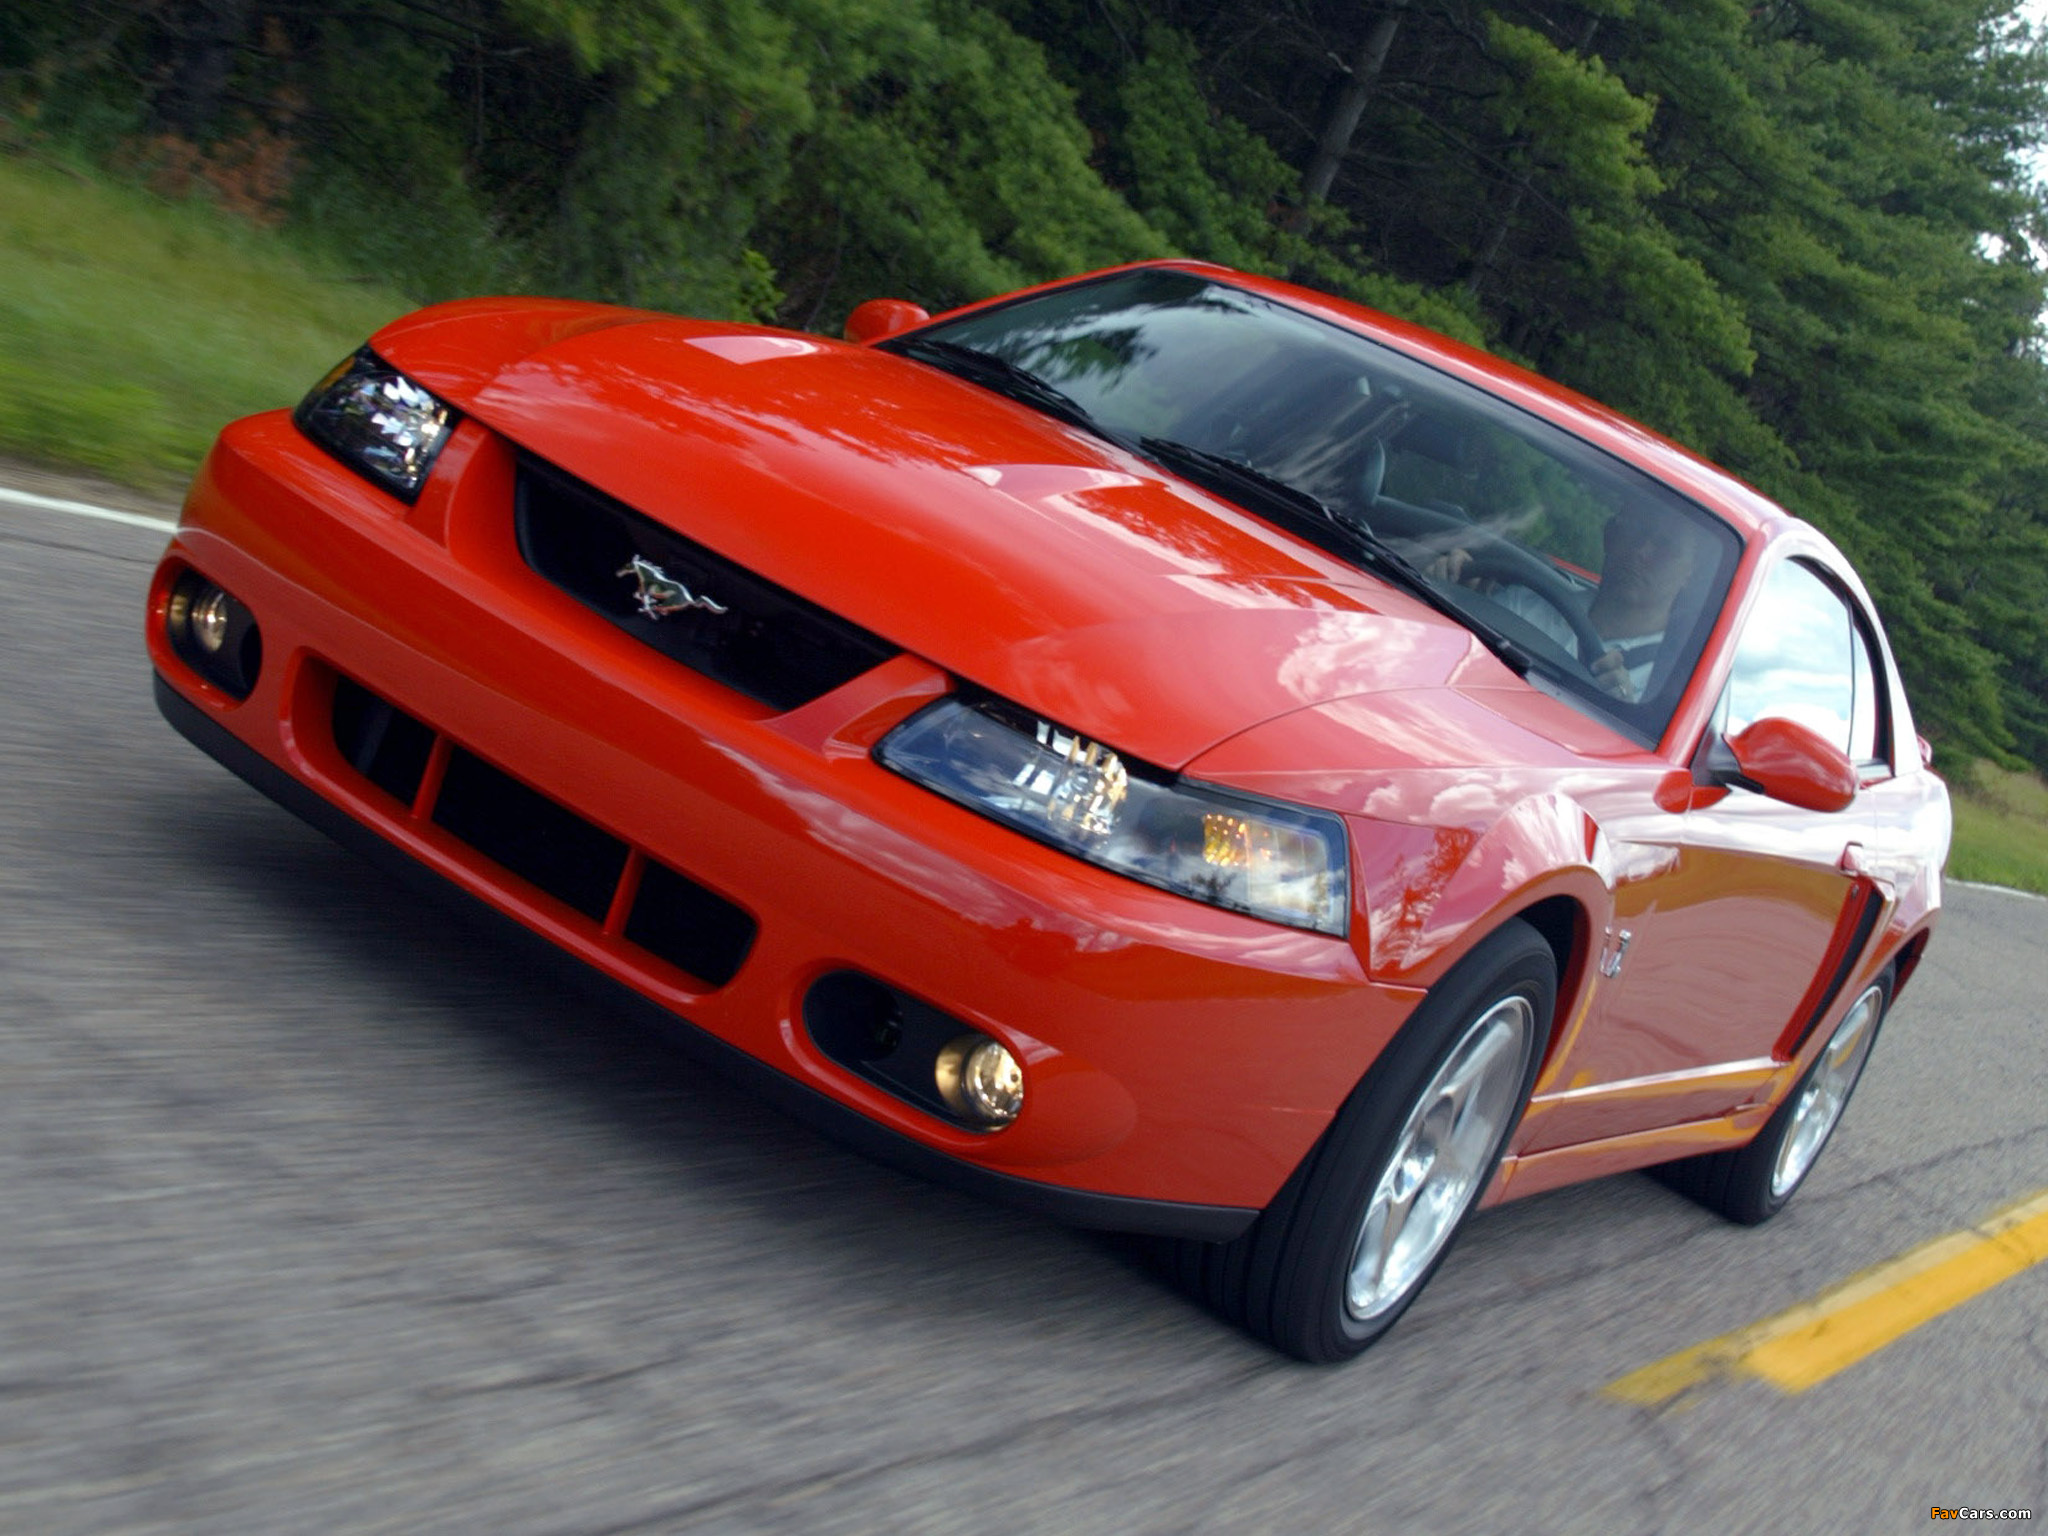 Used Ford Mustang SVT Cobra For Sale - CarGurus